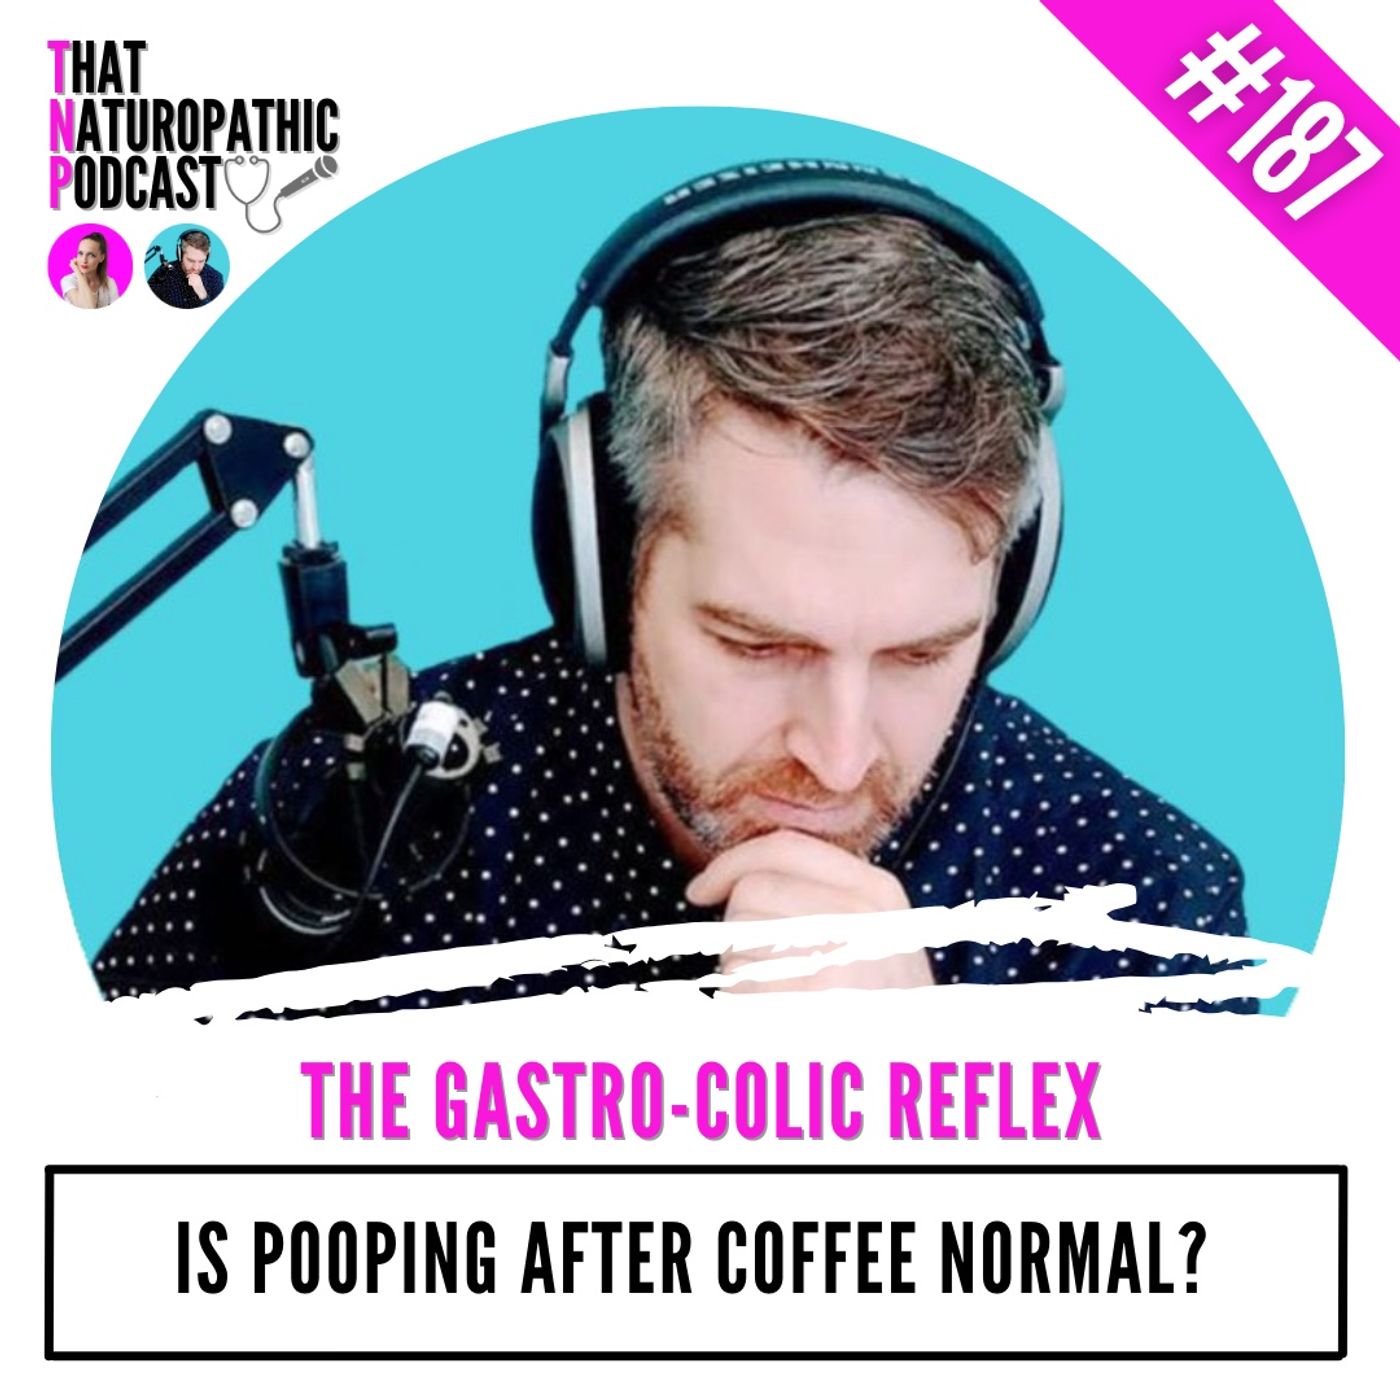 187: THE GASTRO-COLIC REFLEX -- Is Pooping After Coffee Normal?